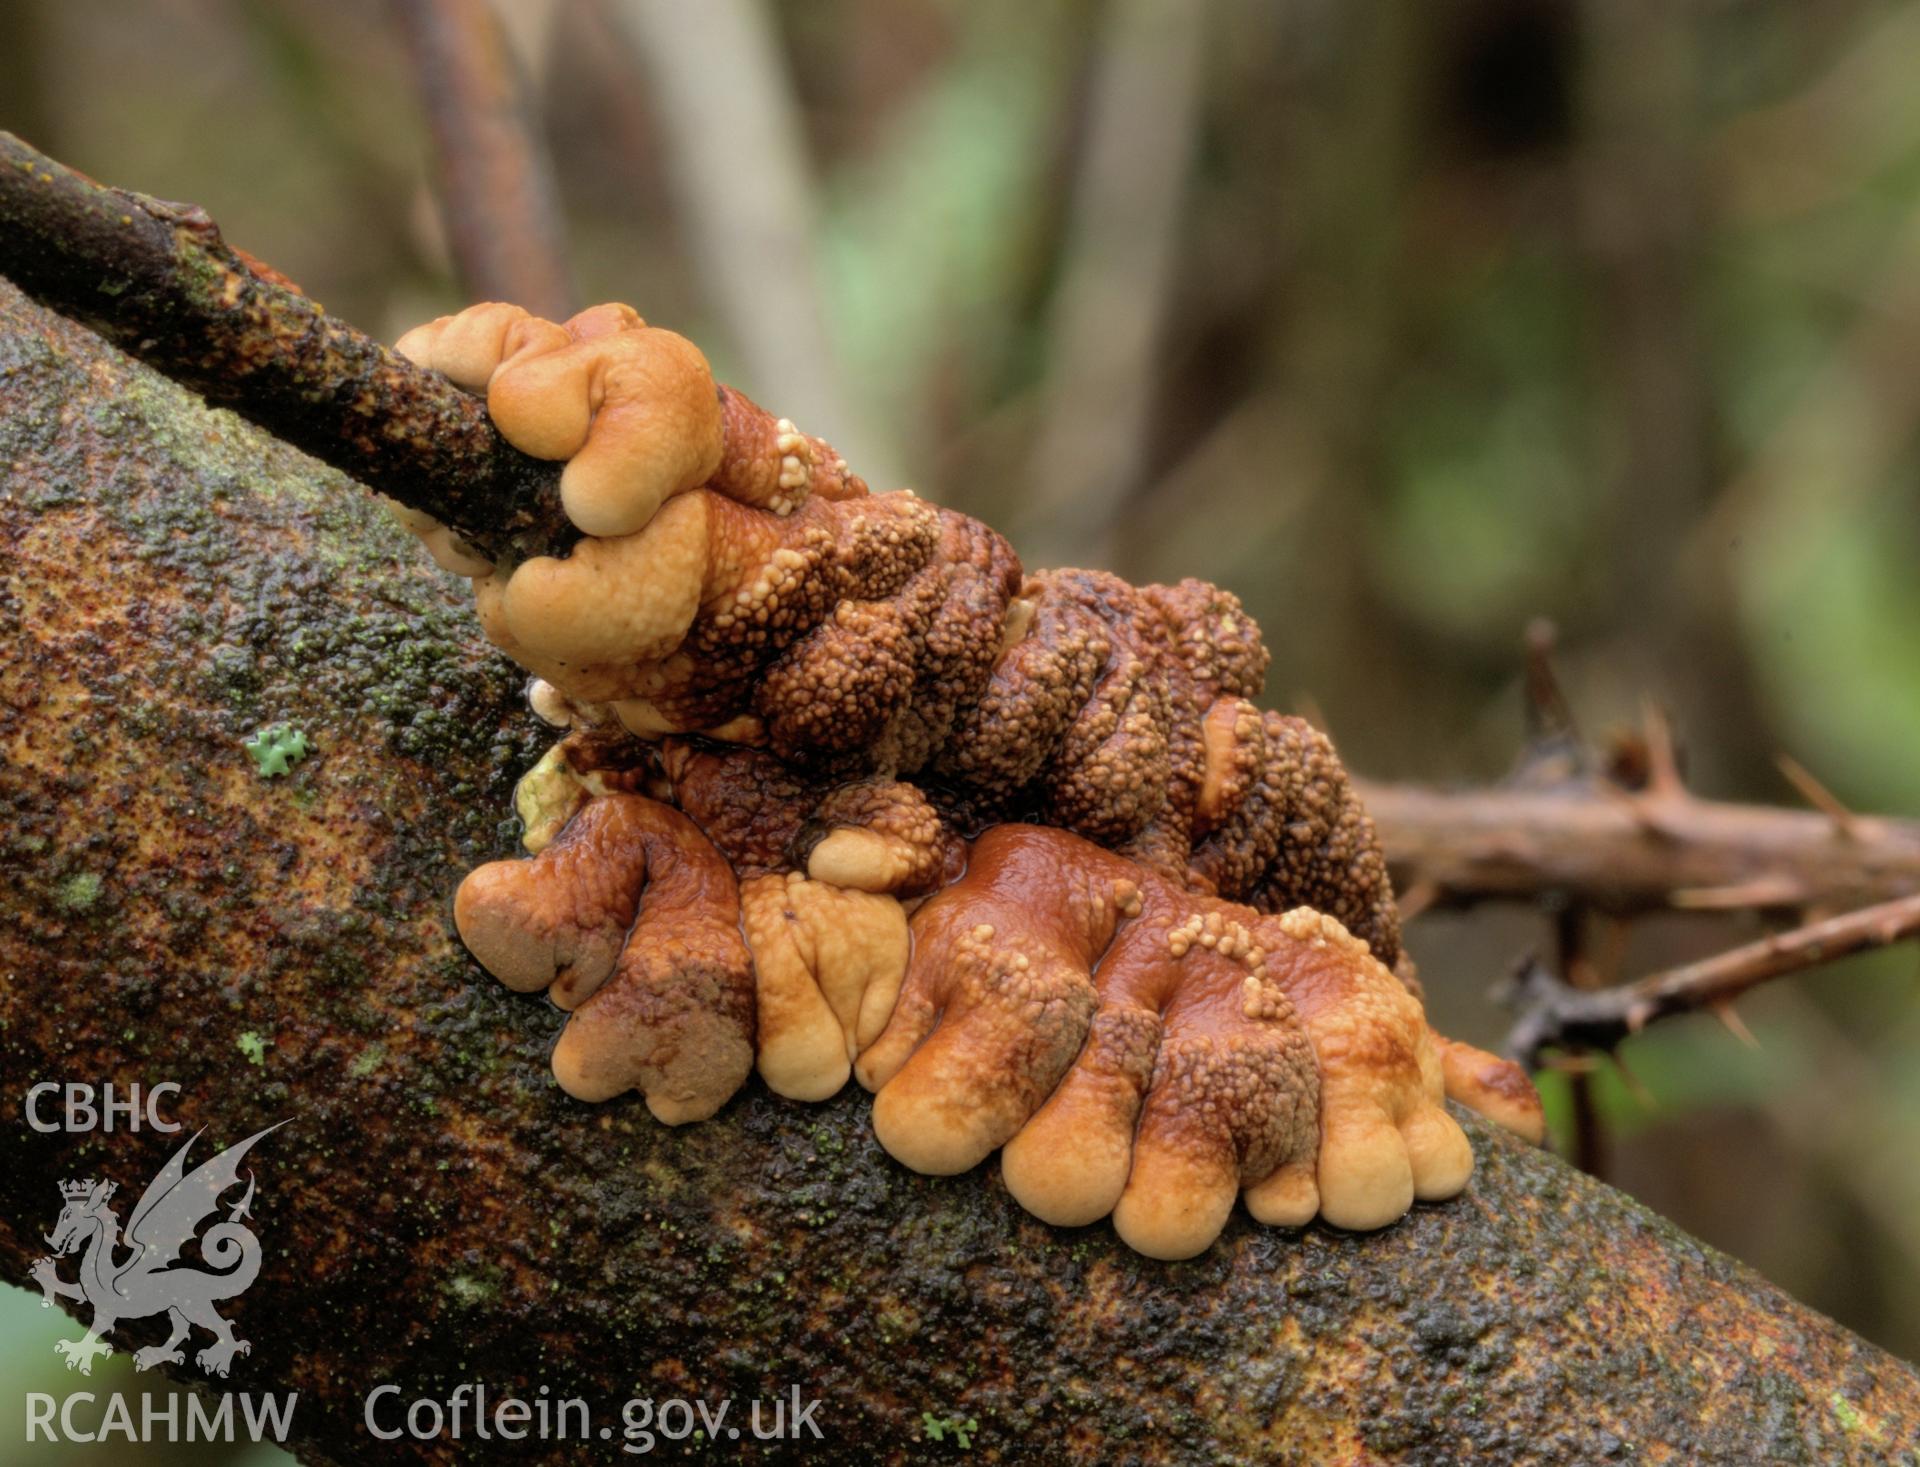 Colour photo showing Willow Gloves fungus adjacent to the northern boundary markers, taken by Mark Evans, January 2017.